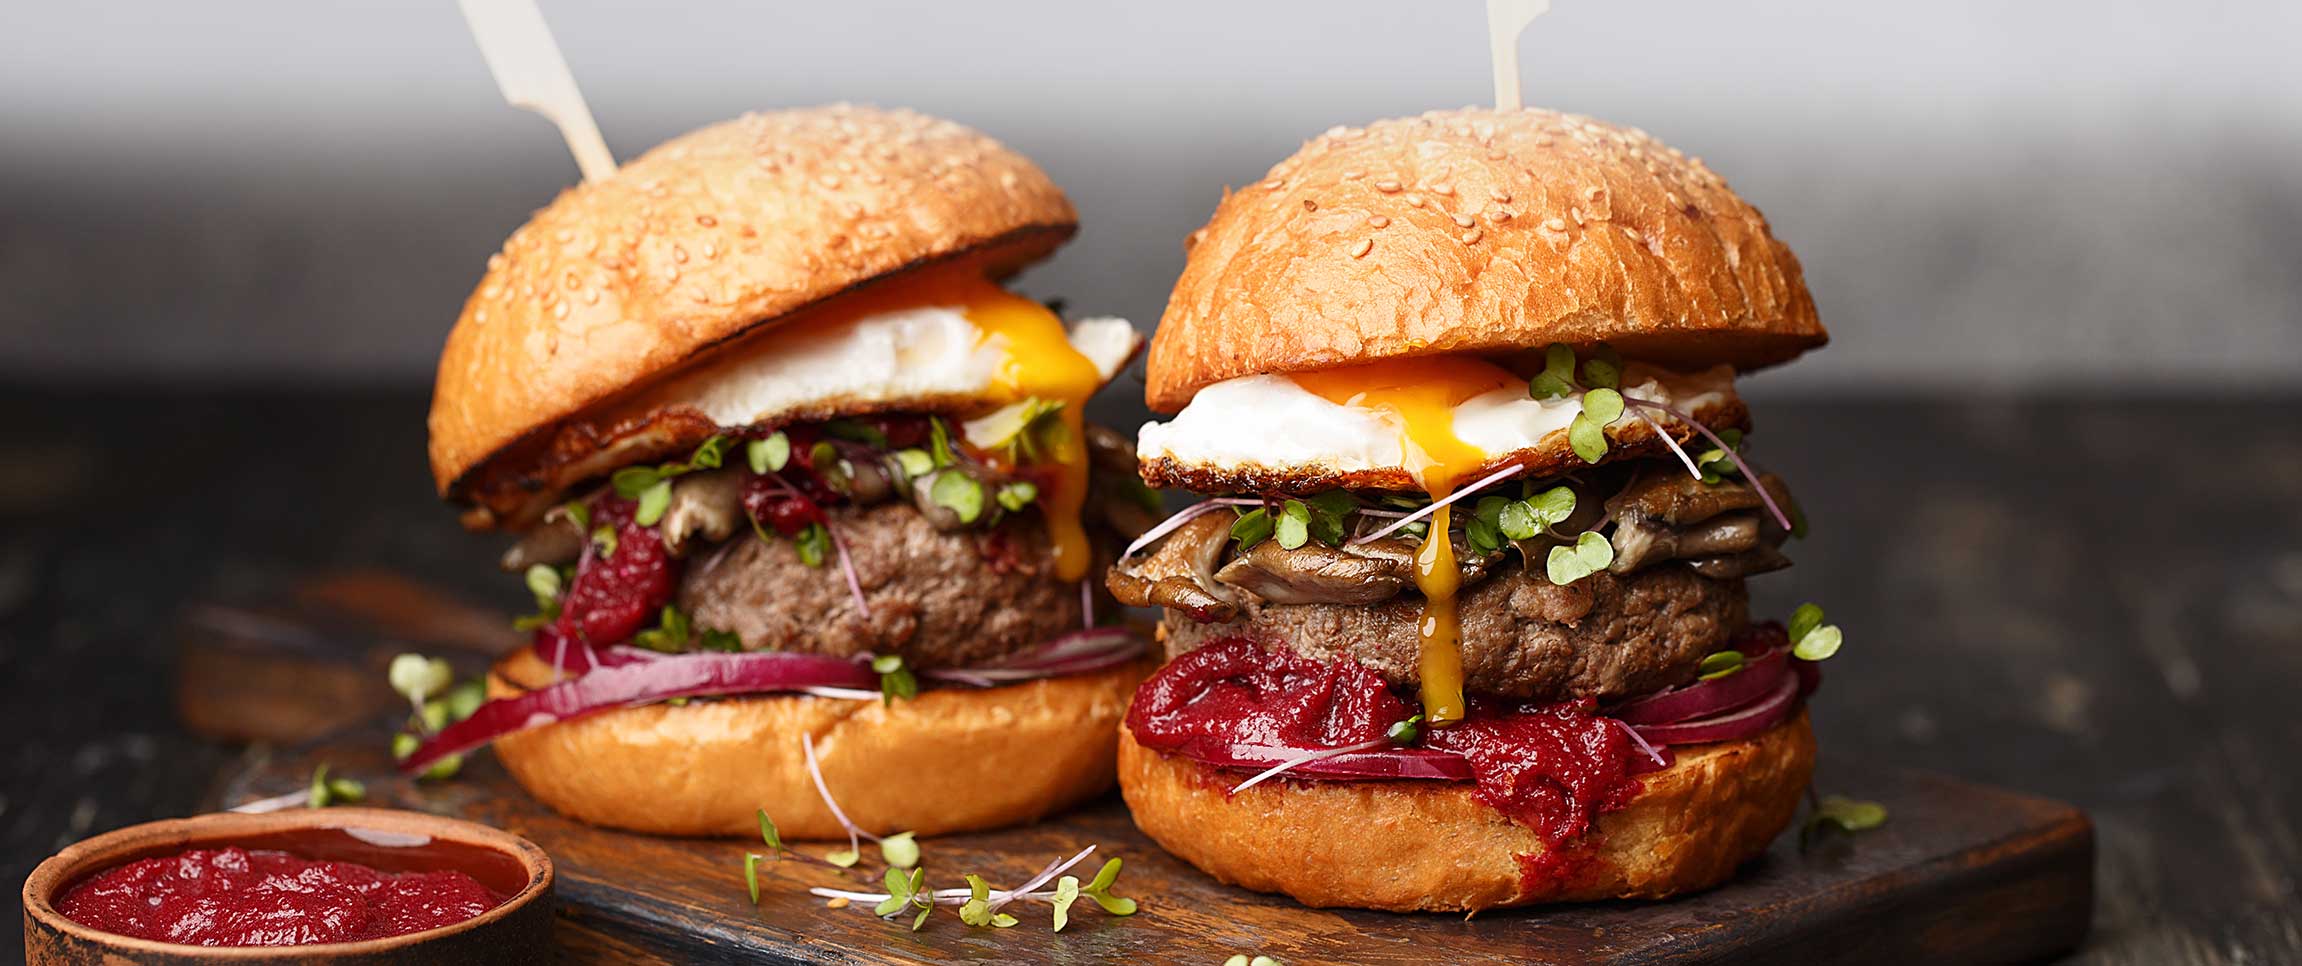 Burger with Roasted Beet Ketchup and Fried Egg on a Sesame Bun